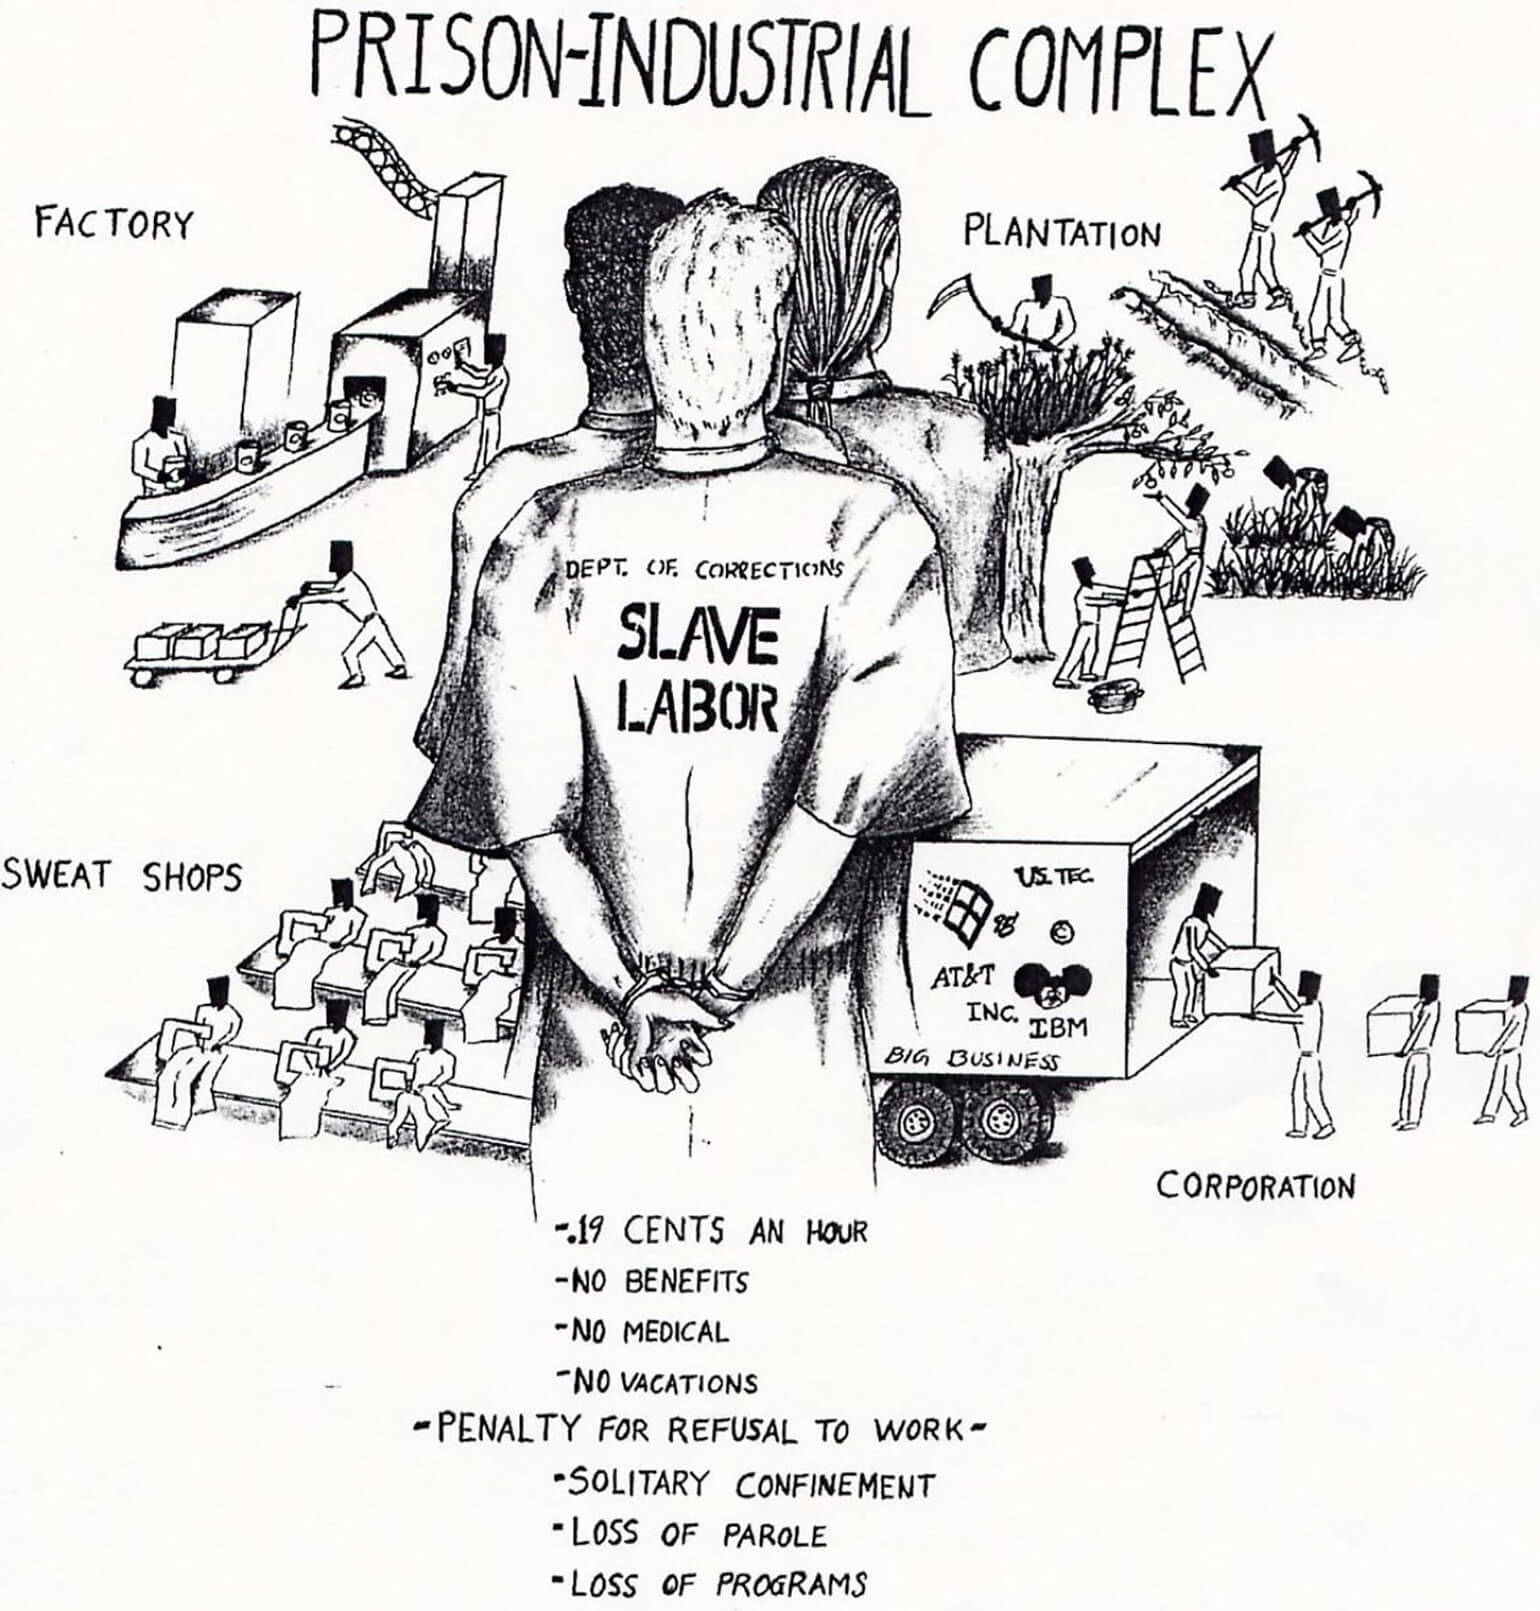 A black and white pencil drawing of an inmate that reads 'Slave Labor'. The drawing also has smaller images of workers unloading a truck for a corporation, inmates working in sweatshops, inmates on an assembly line and doing outdoor work labeled as ‘plantation’ The graphic also lists out some facts about prison labor like the lack of benefits and 19 cents an hour of pay as well as punishments for refusing to work.